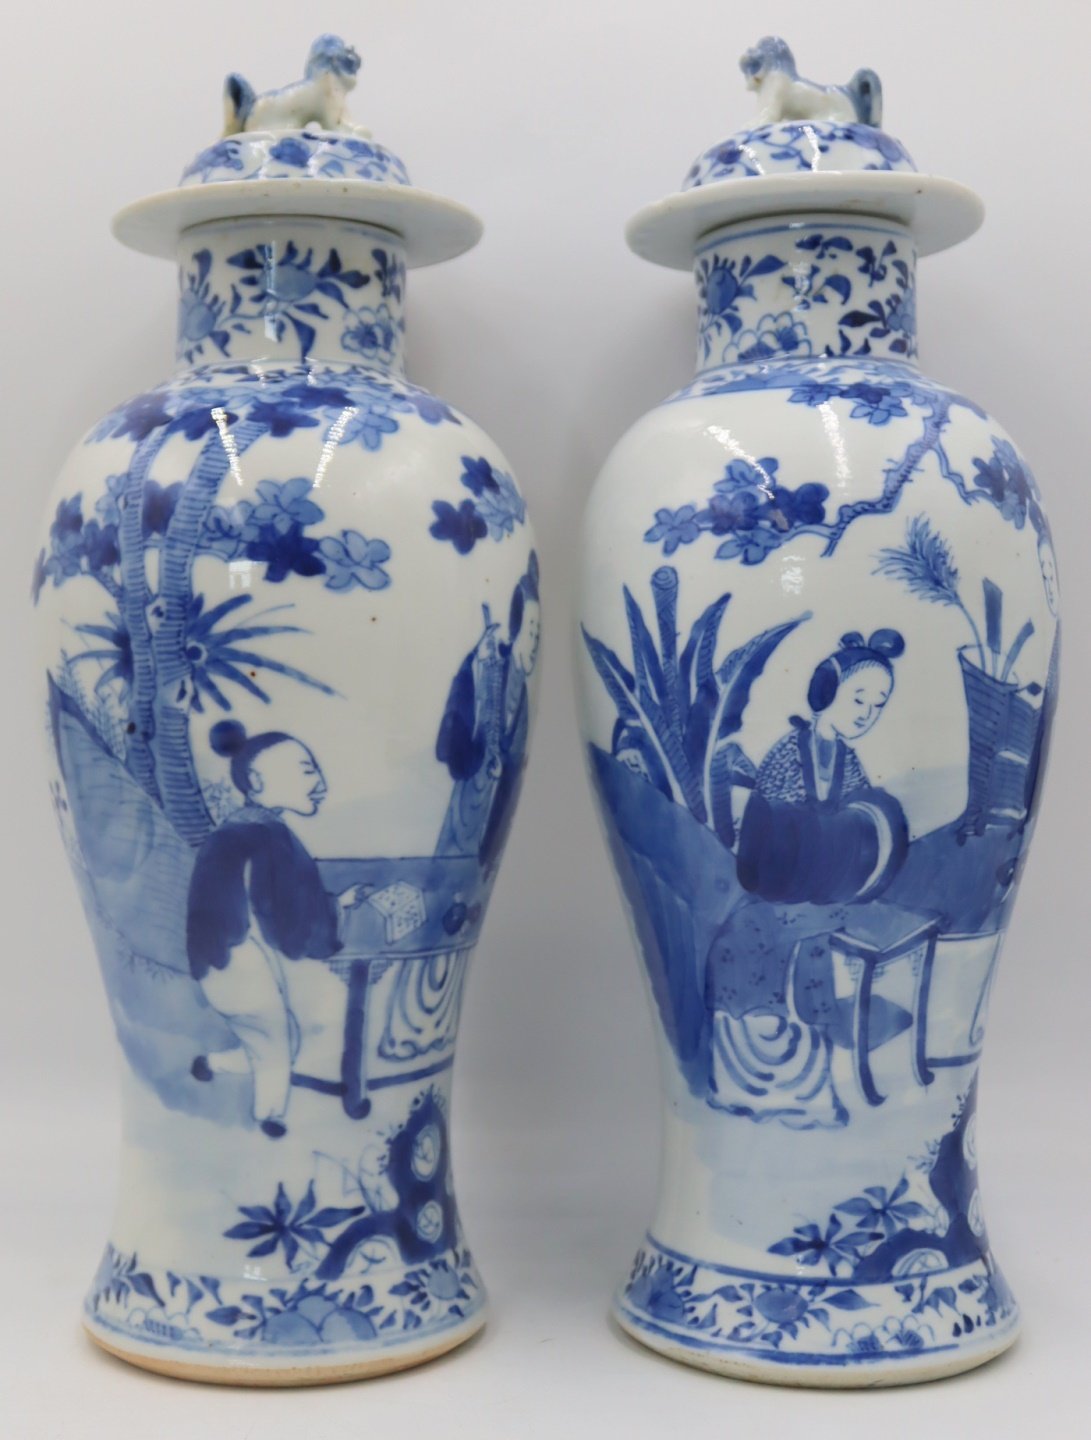 PAIR OF SIGNED CHINESE BLUE AND